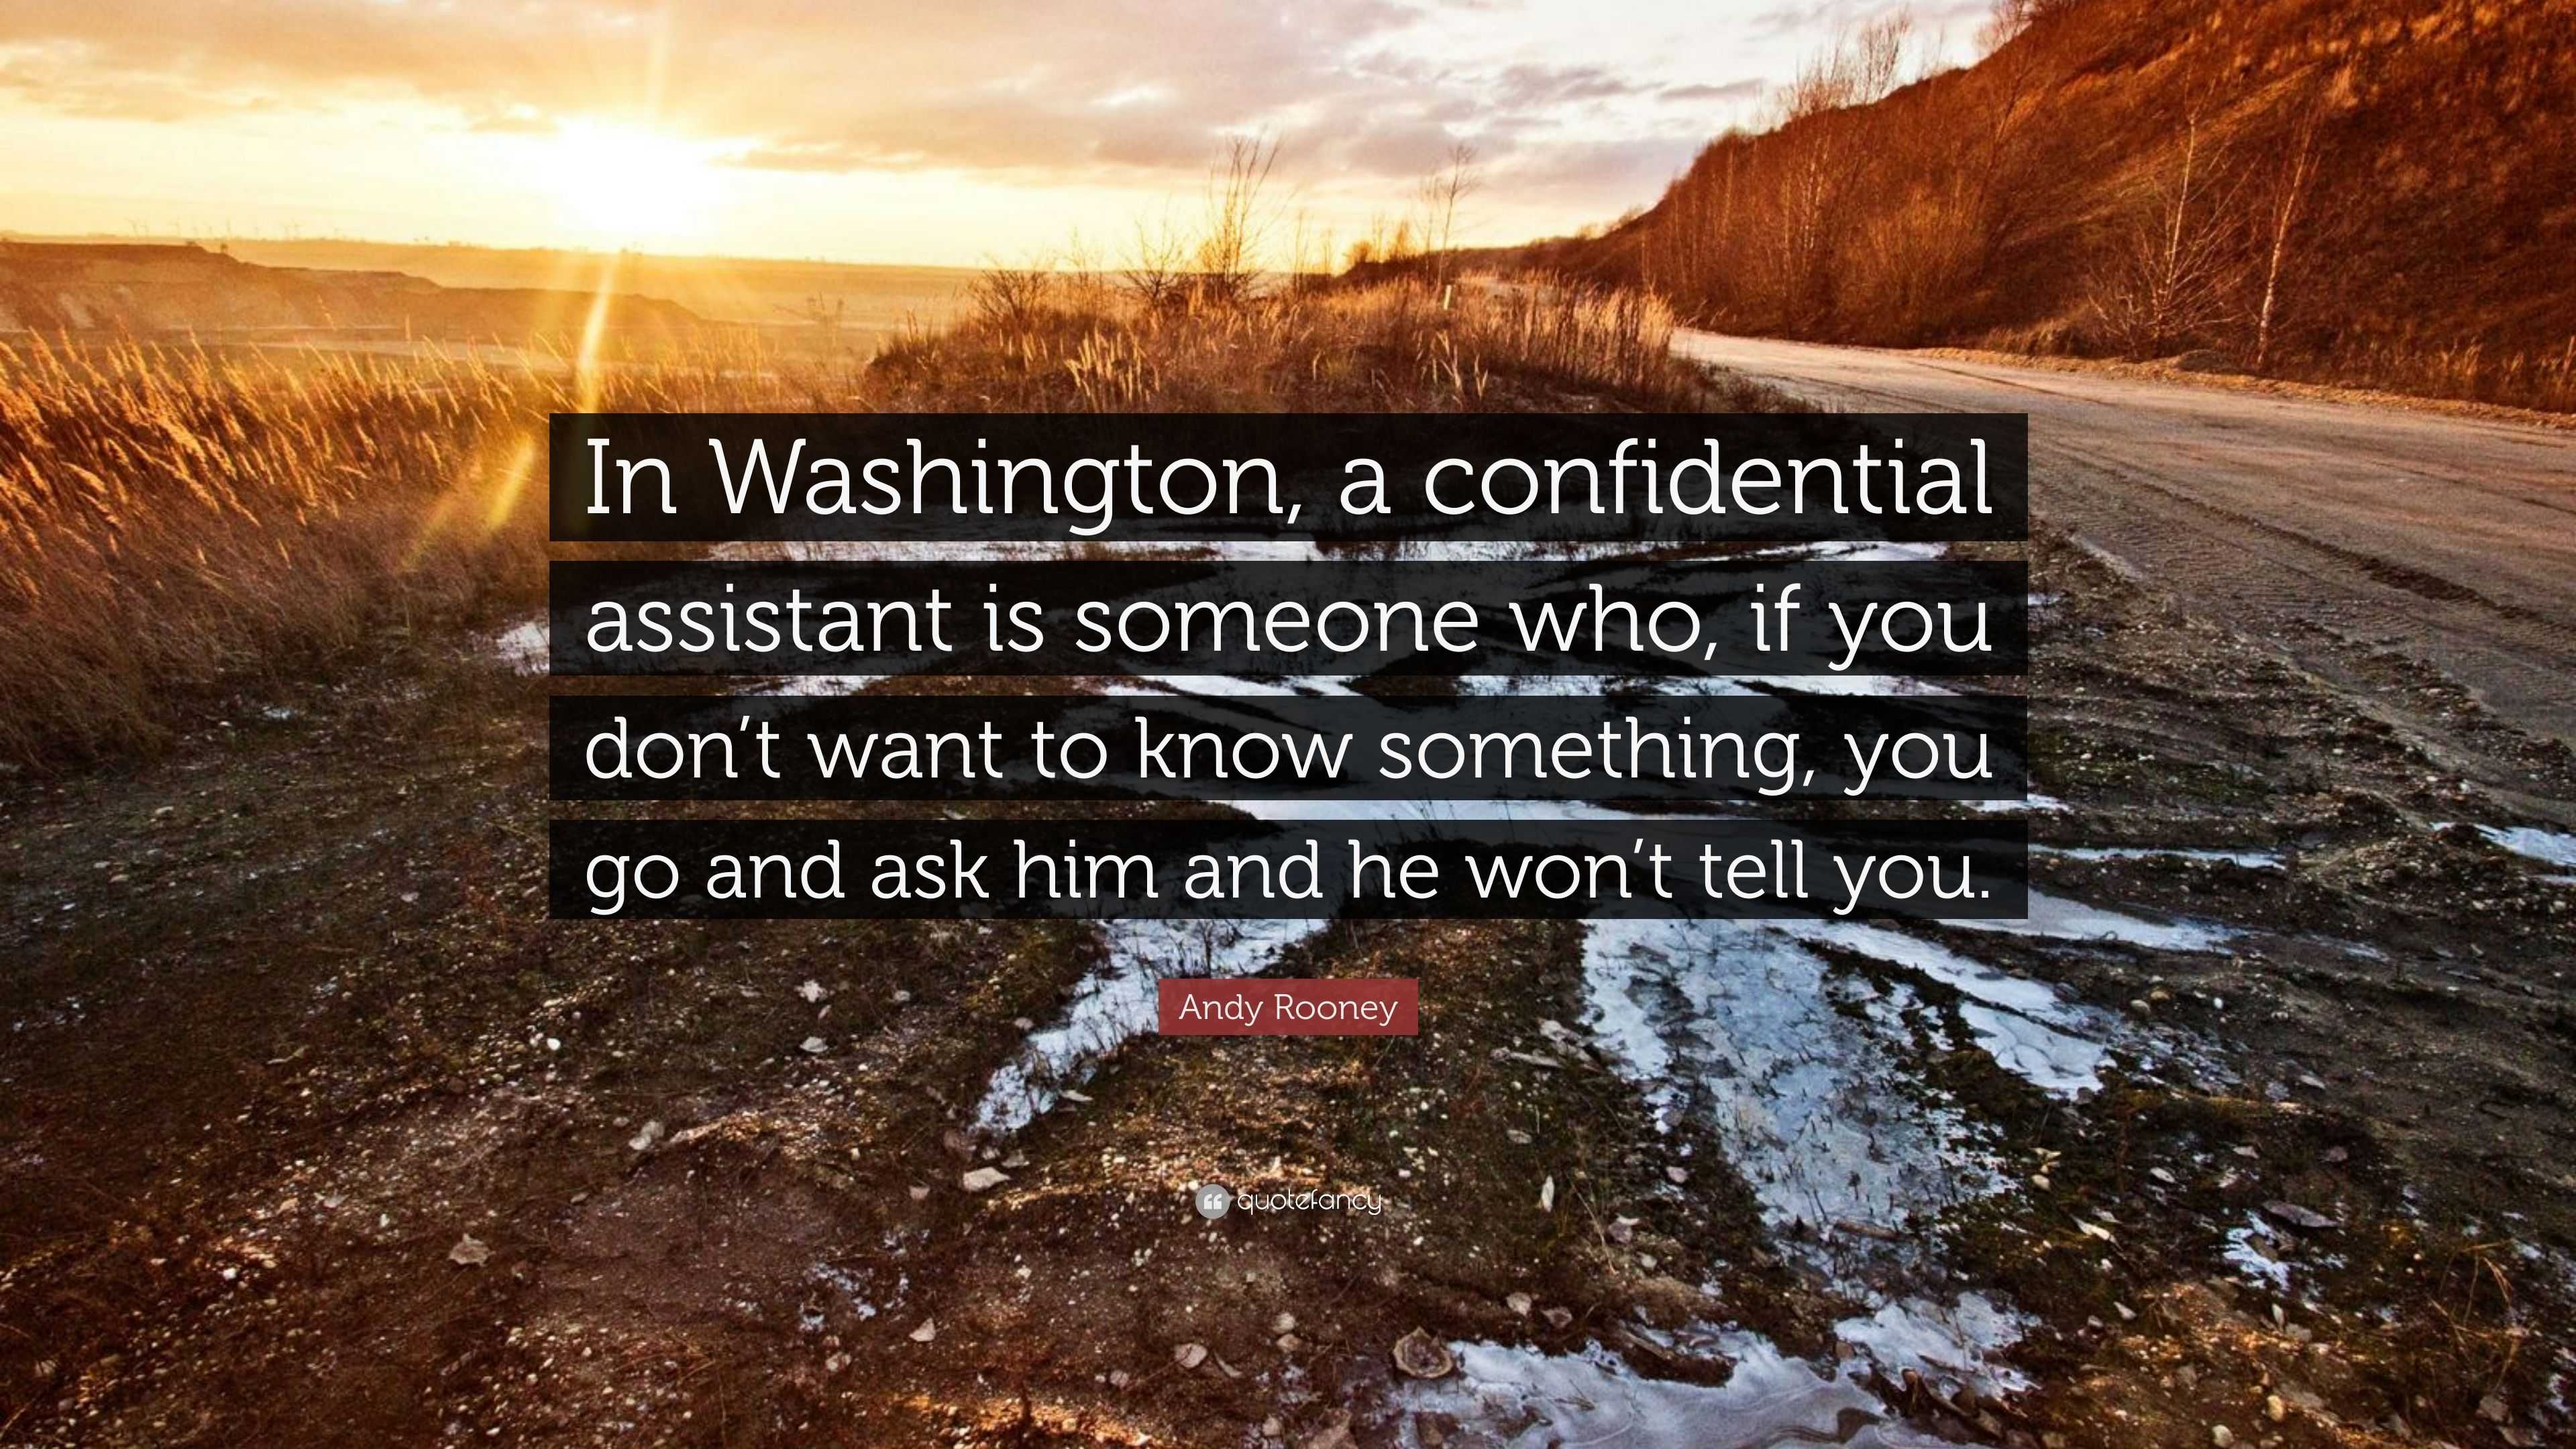 Andy Rooney Quote In Washington A Confidential Assistant Is Someone Who If You Don T Want To Know Something You Go And Ask Him And He W